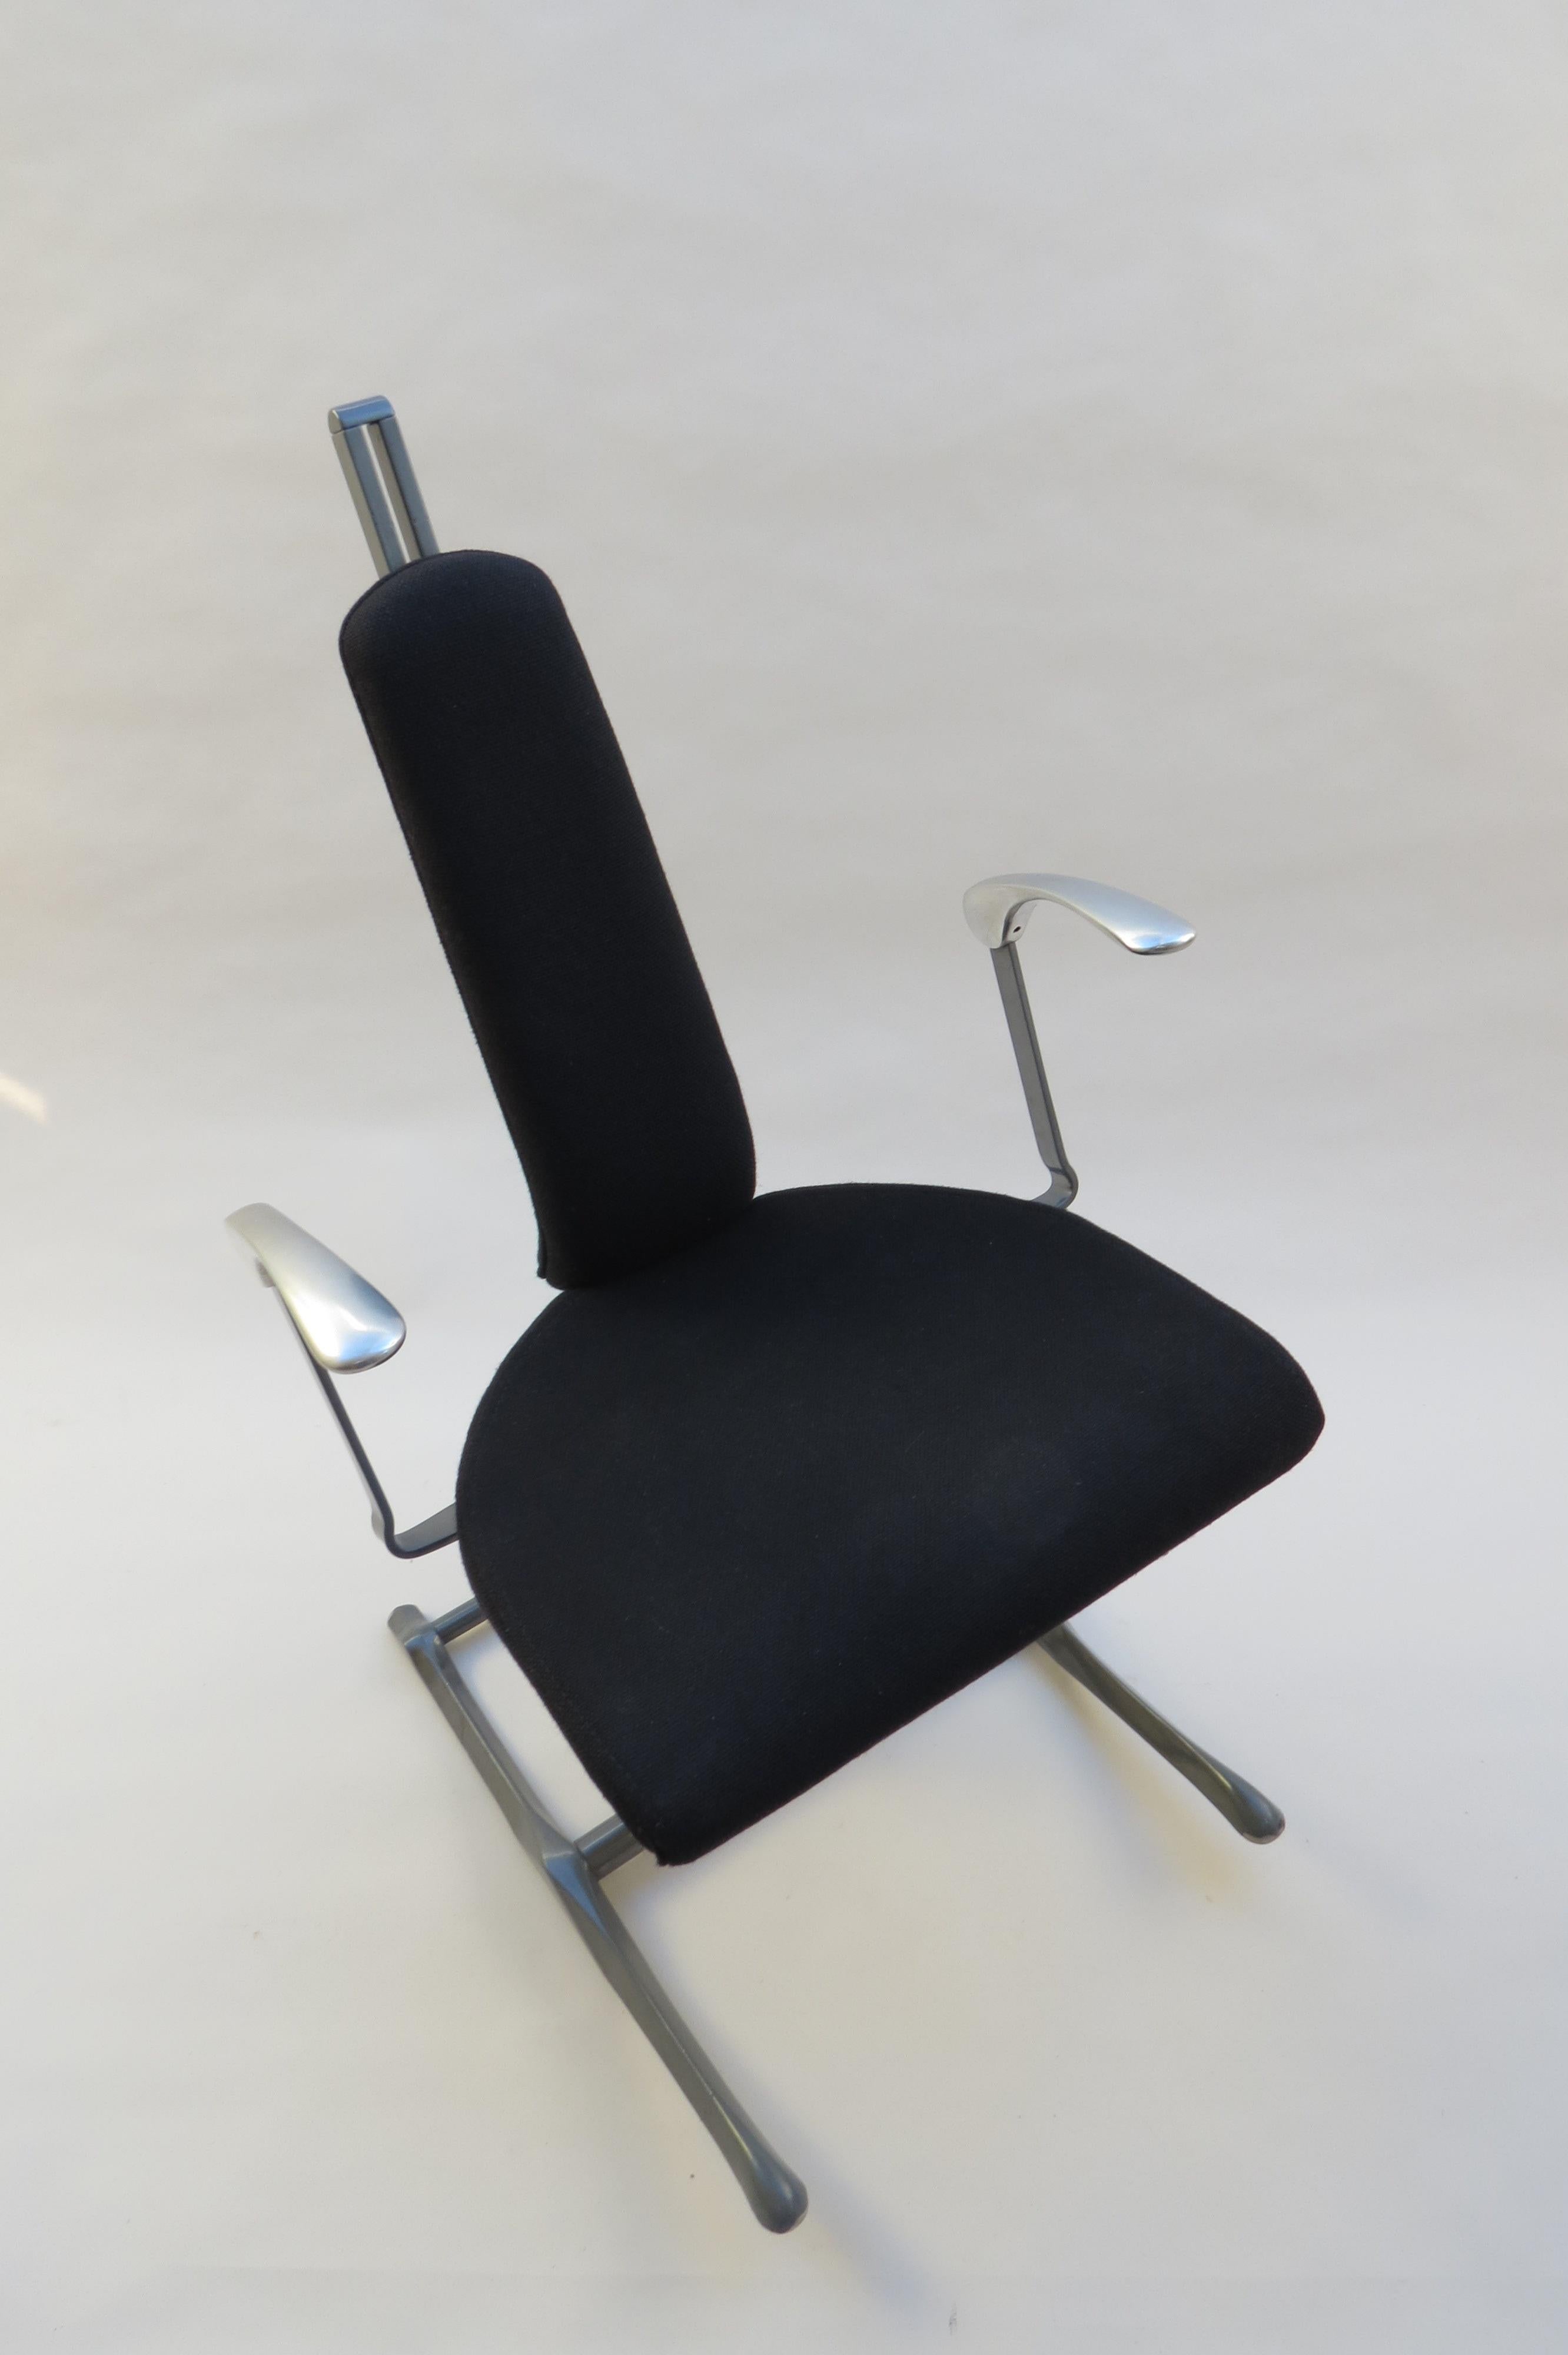 Office desk chair designed by Michael Dye for Hille. Dates from the 1990s. 
The chair adjusts to suit you, both the backrest and the seat. The base also rocks into 3 different positions. Incredibly comfortable and provides a very comfortable